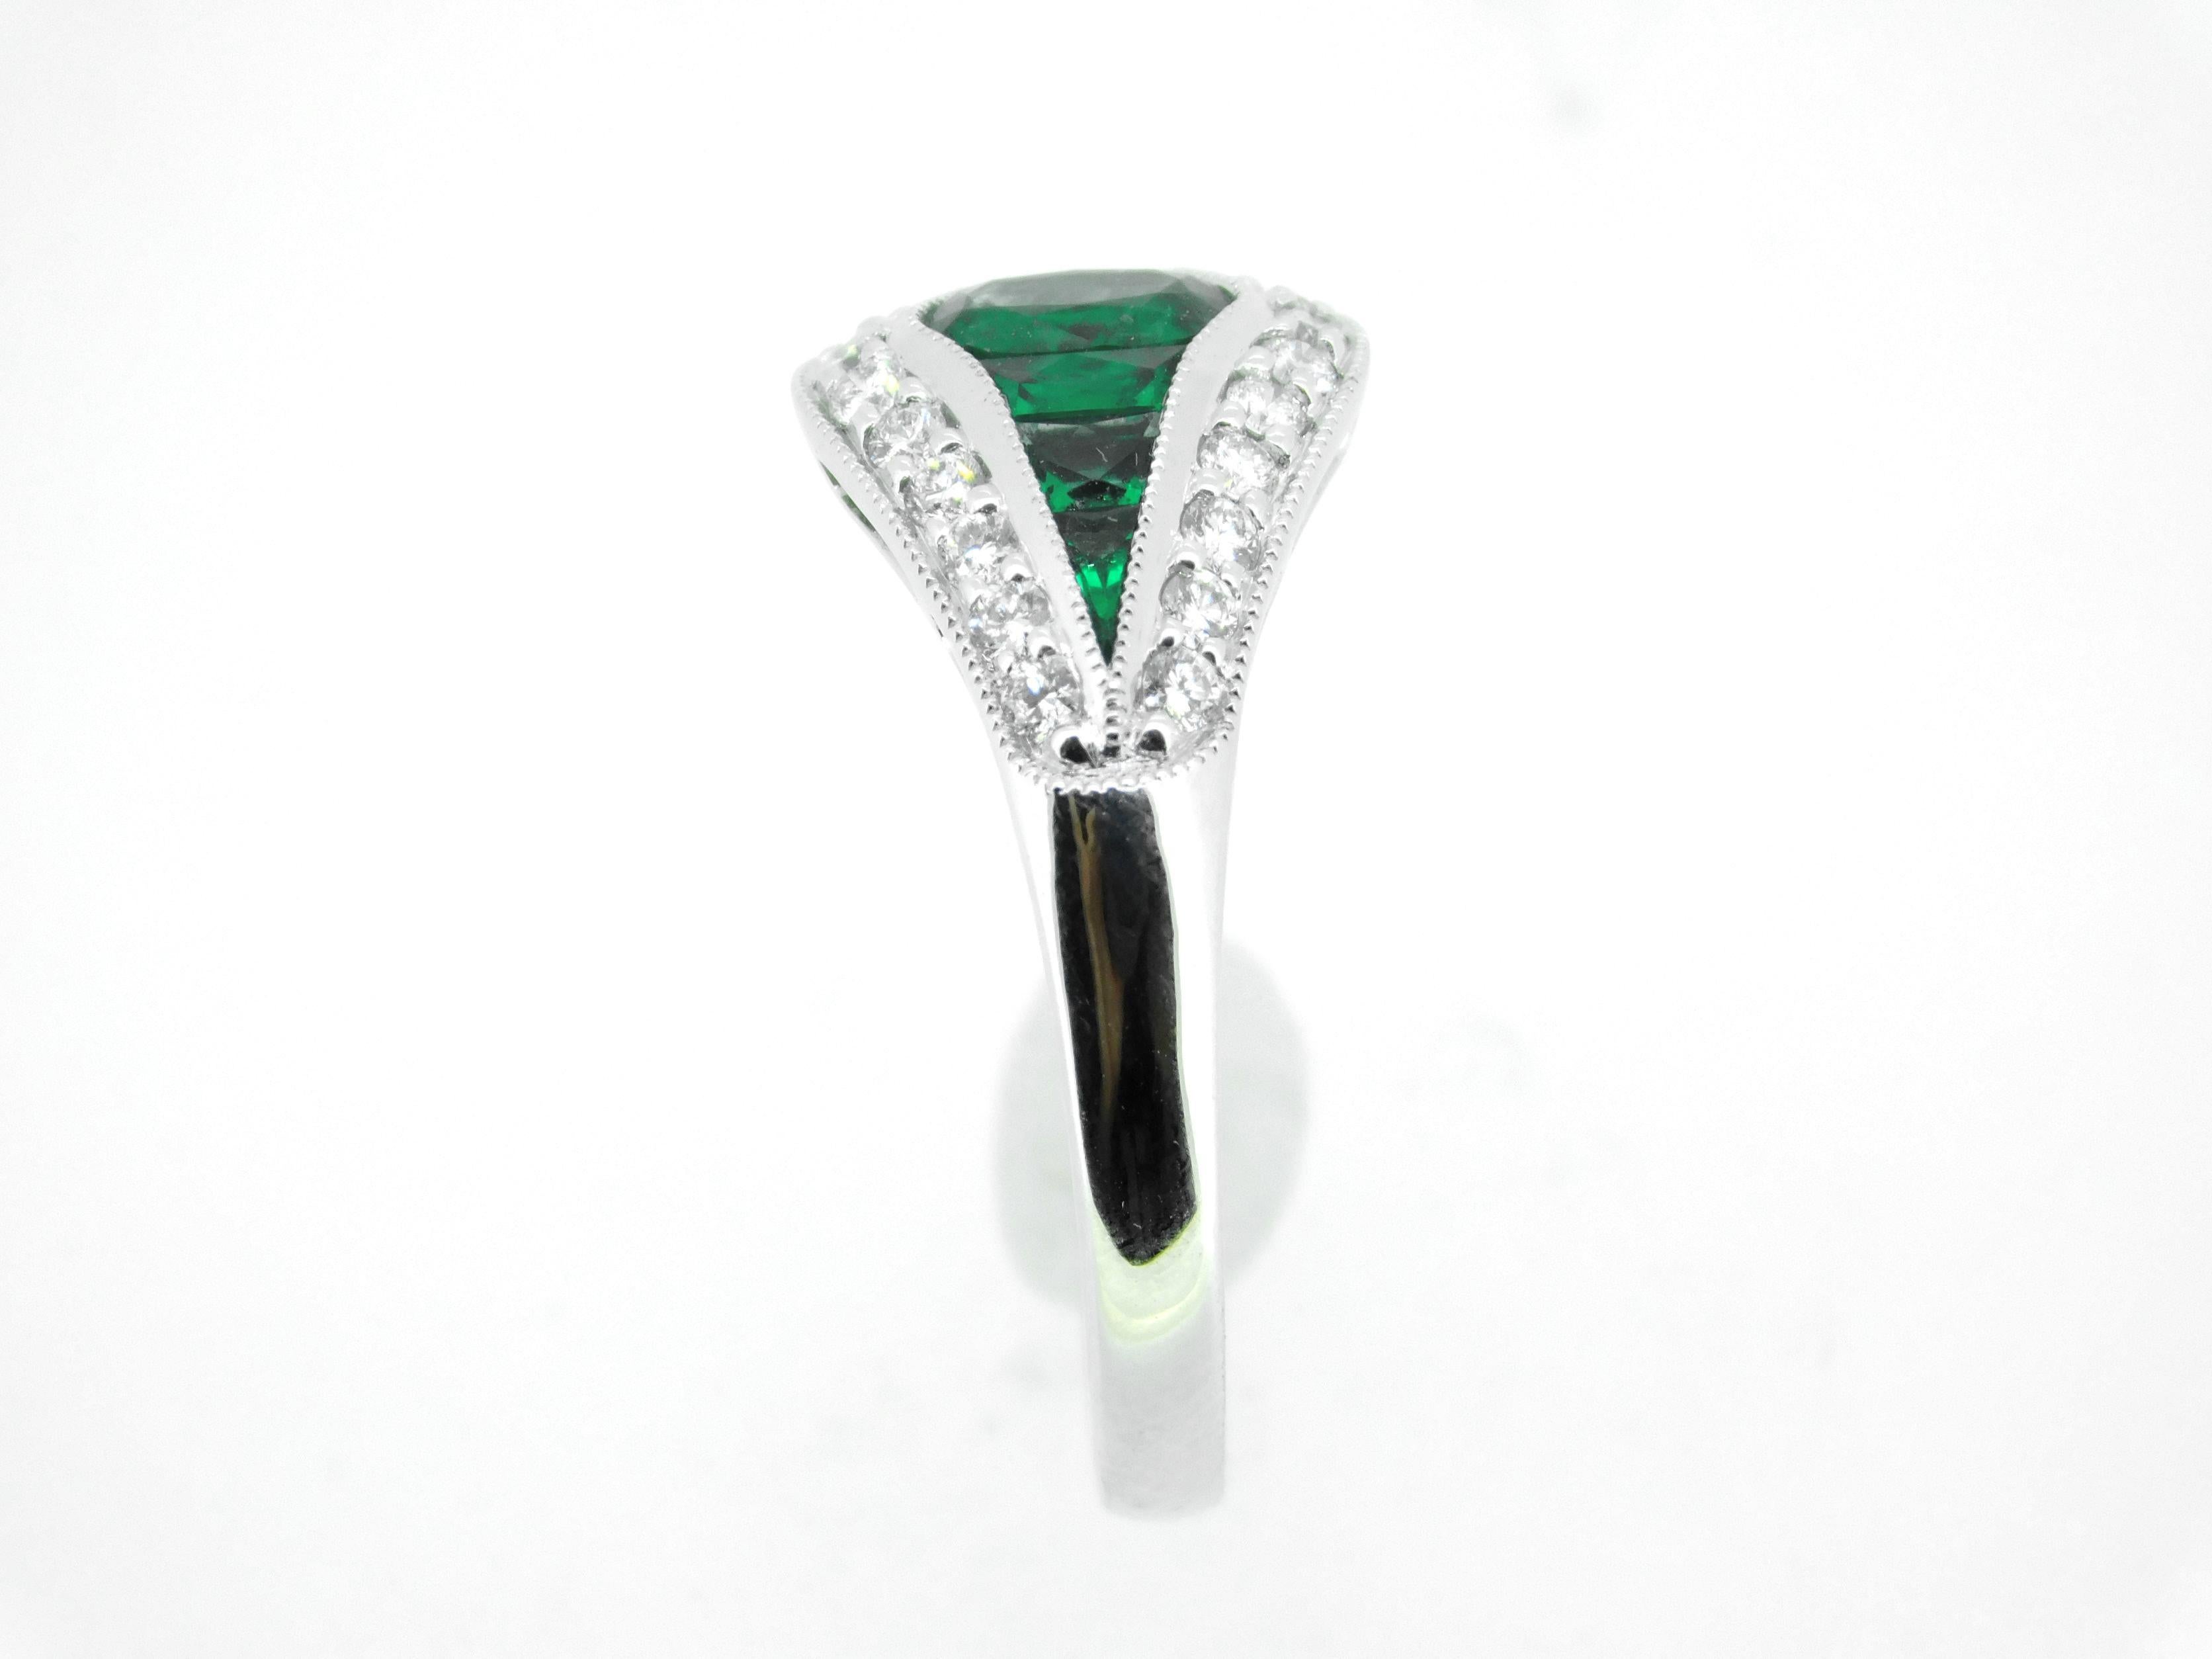 18k Gold Specialty Cut Fine Genuine Natural Emerald and Diamond Ring (#J5124)

18k white gold emerald and diamond ring featuring seven earth mined emeralds weighing 1.04 carats total. The center oval emerald weighs .40cts, and the six side specialty